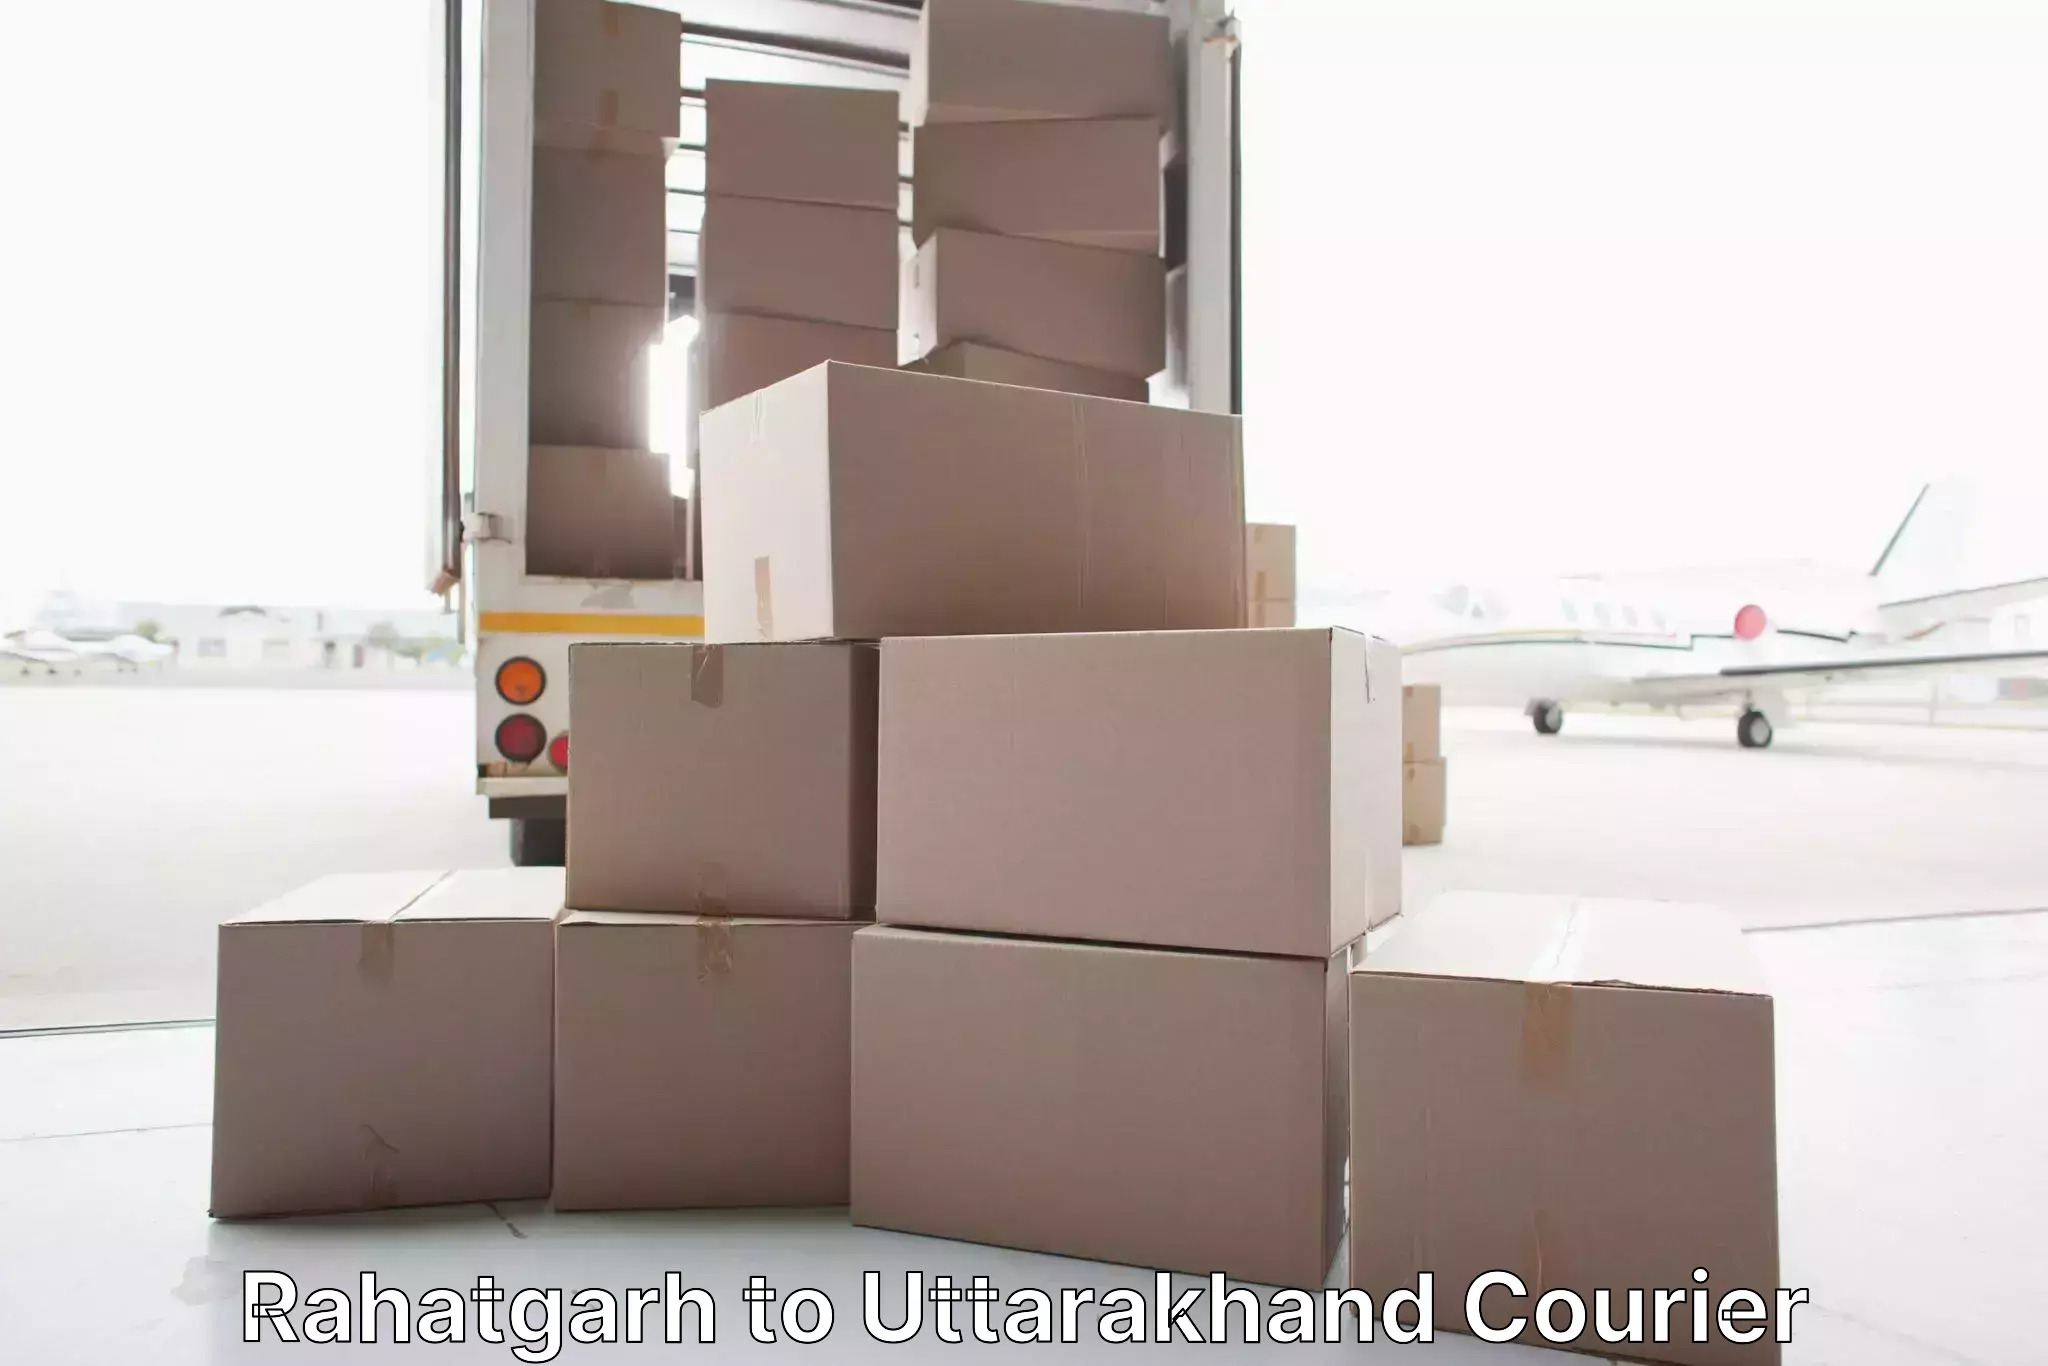 Efficient relocation services Rahatgarh to Roorkee